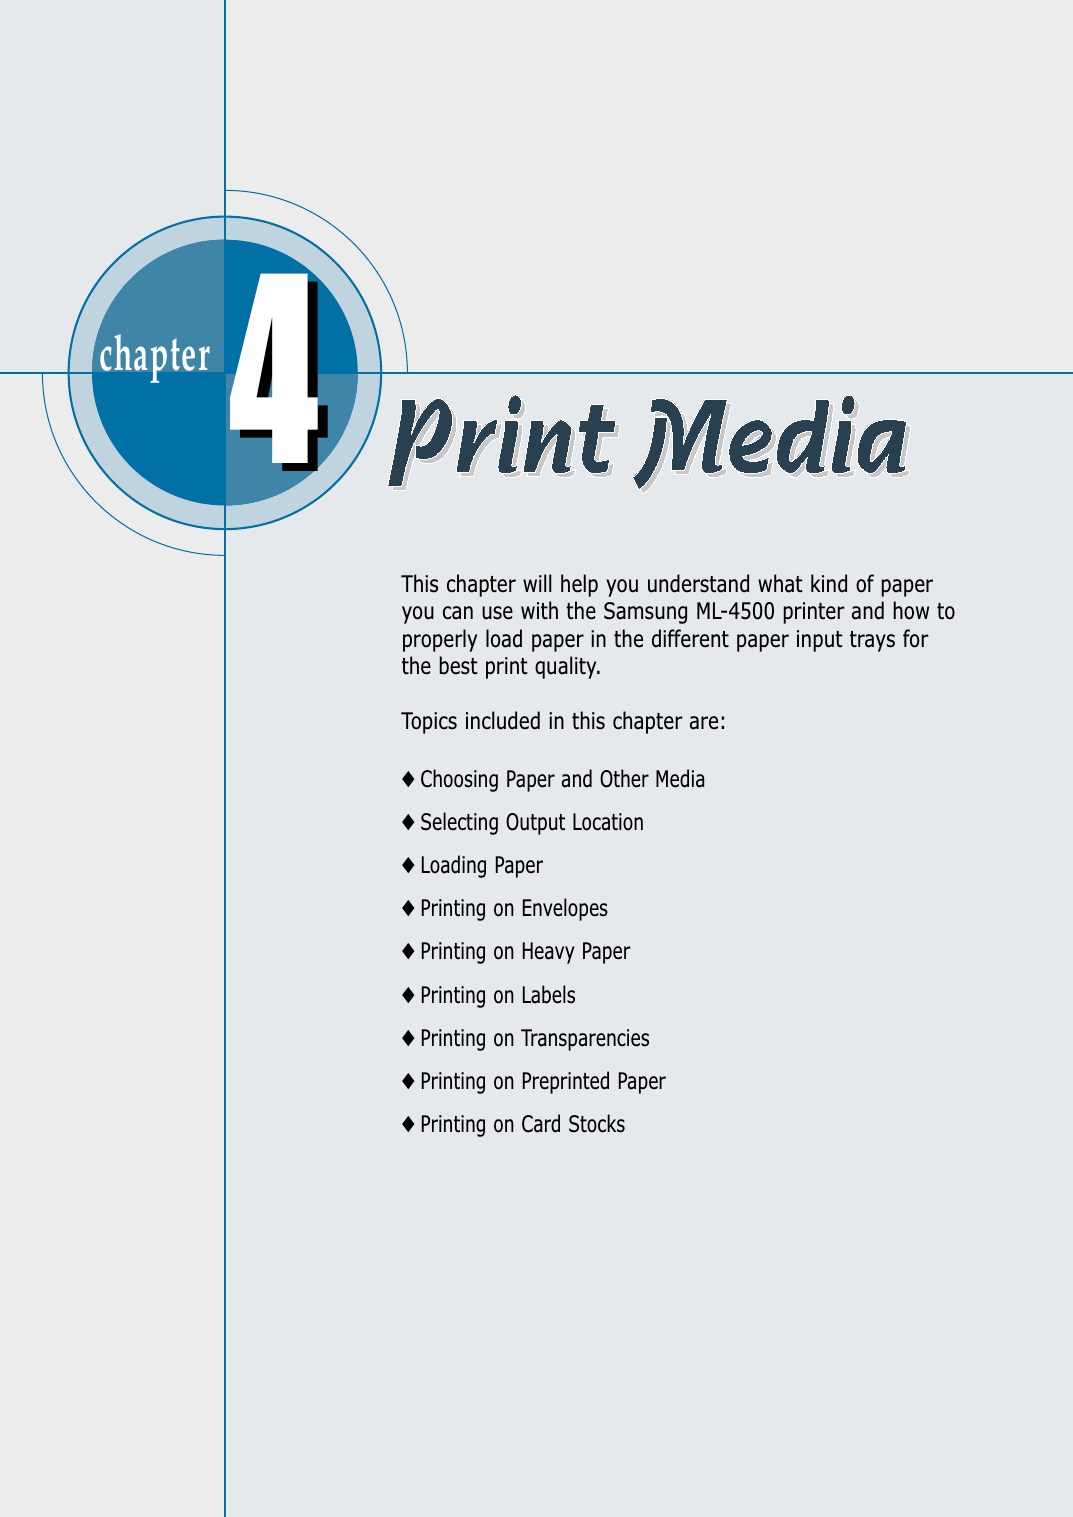 chapter  This chapter will help you understand what kind of paperyou can use with the Samsung ML-4500 printer and how toproperly load paper in the different paper input trays forthe best print quality.Topics included in this chapter are:◆ Choosing Paper and Other Media◆ Selecting Output Location◆ Loading Paper◆ Printing on Envelopes◆ Printing on Heavy Paper◆ Printing on Labels◆ Printing on Transparencies◆ Printing on Preprinted Paper◆ Printing on Card Stocks44